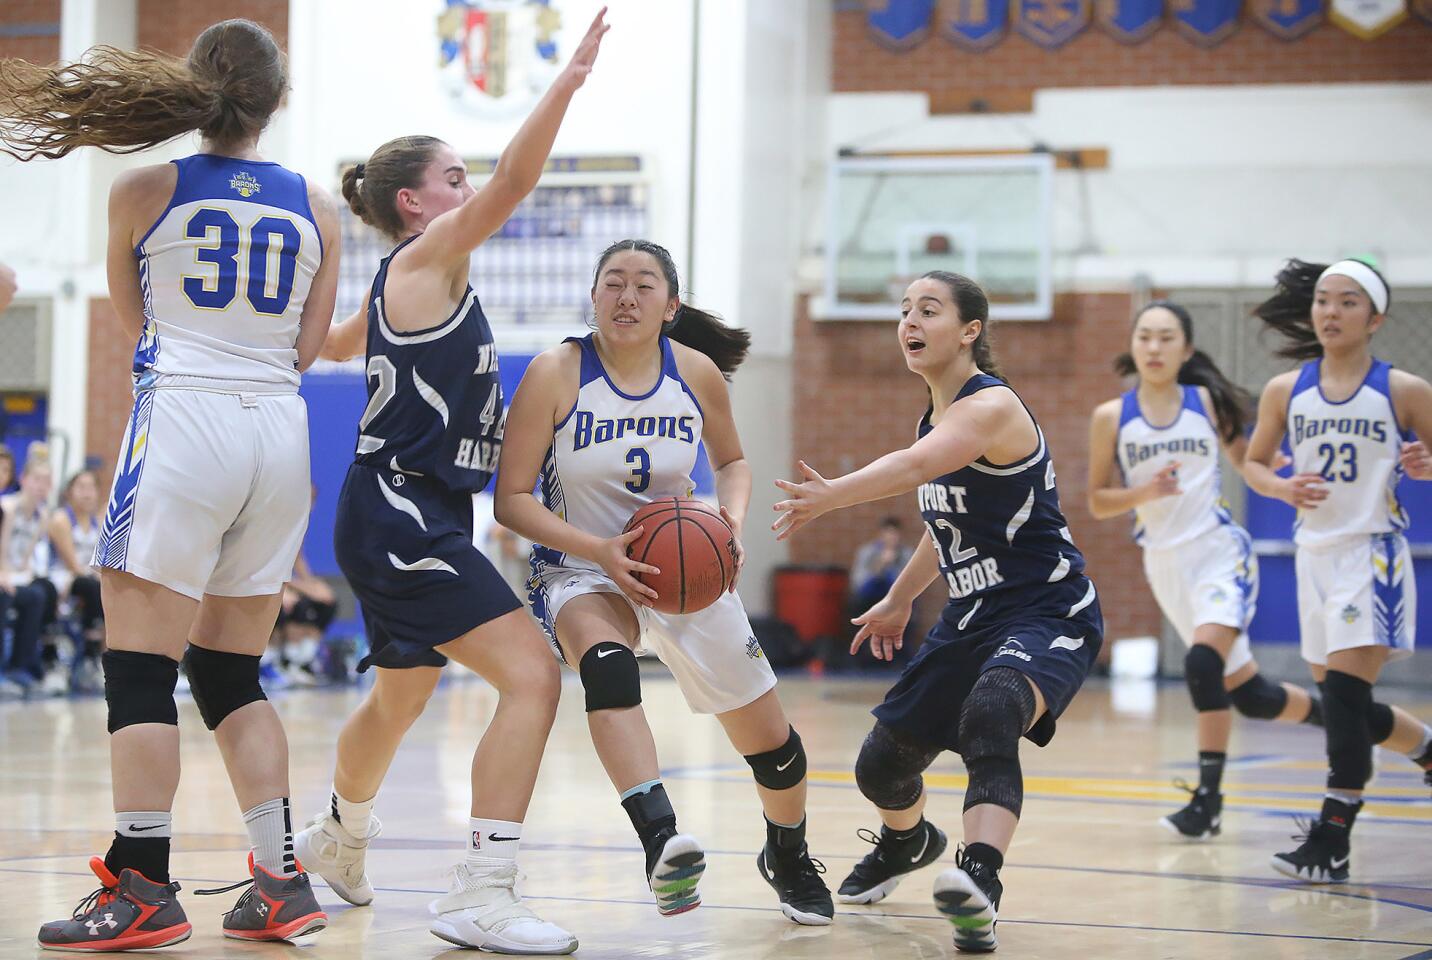 Fountain Valley High's Megan Lai drives to the basket and scores between Newport Harbor's Emma Fults, left, and Selena Muller during a Wave League girls' basketball game on Tuesday.